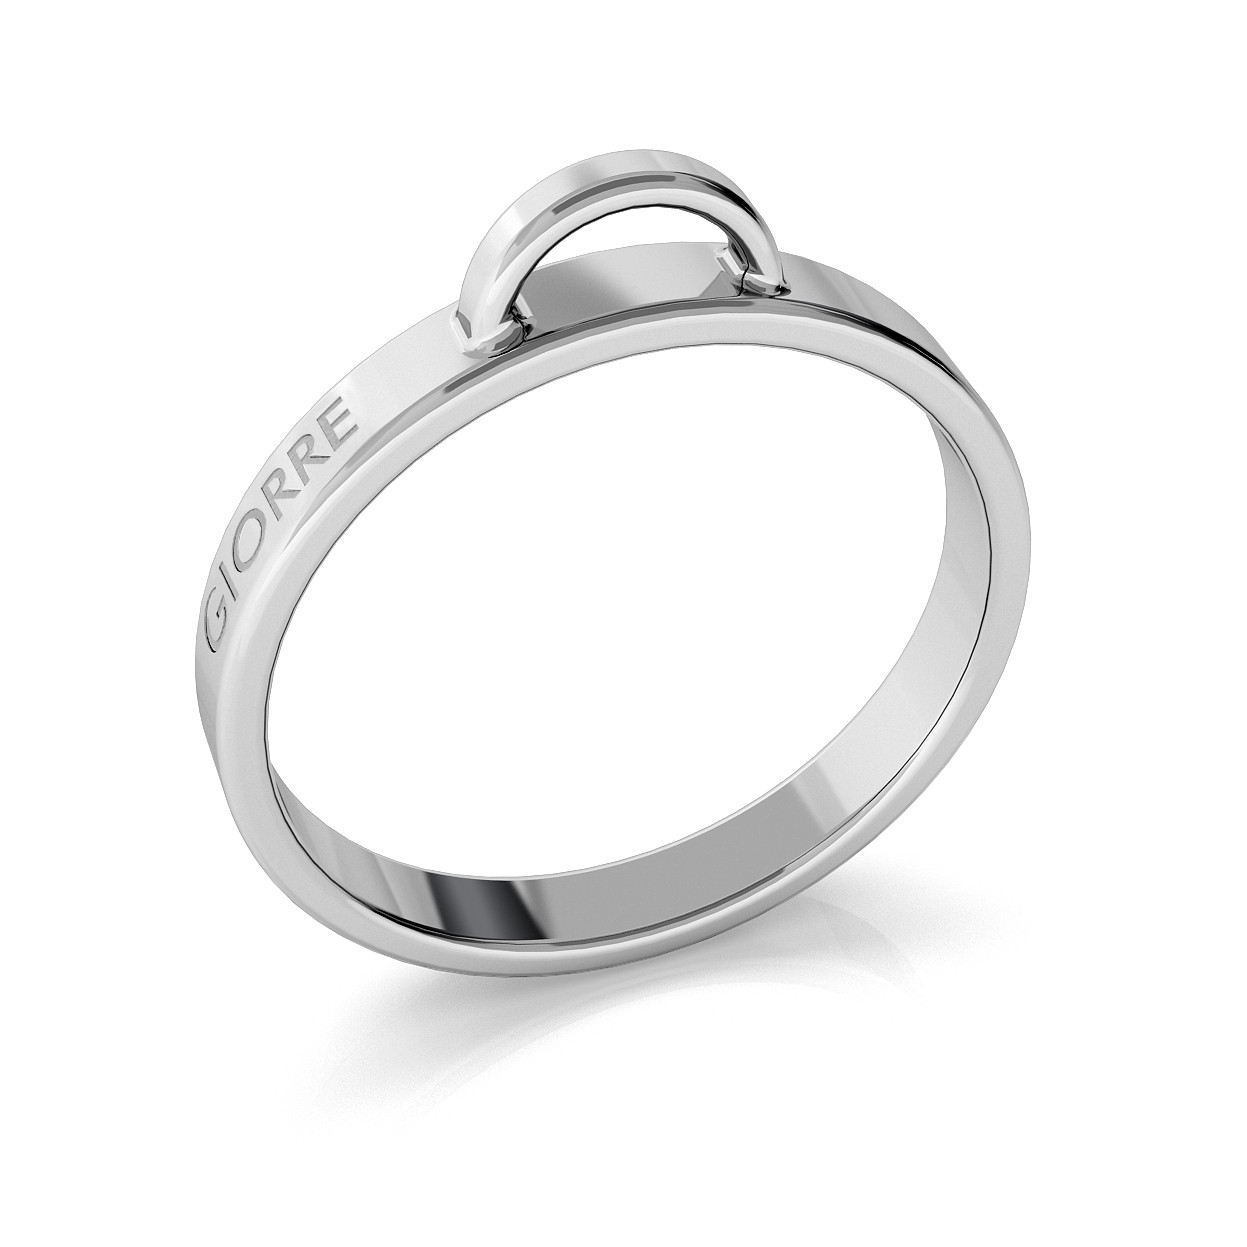 RING FOR CHARM, STERLING SILVER (925) RHODIUM OR GOLD PLATED